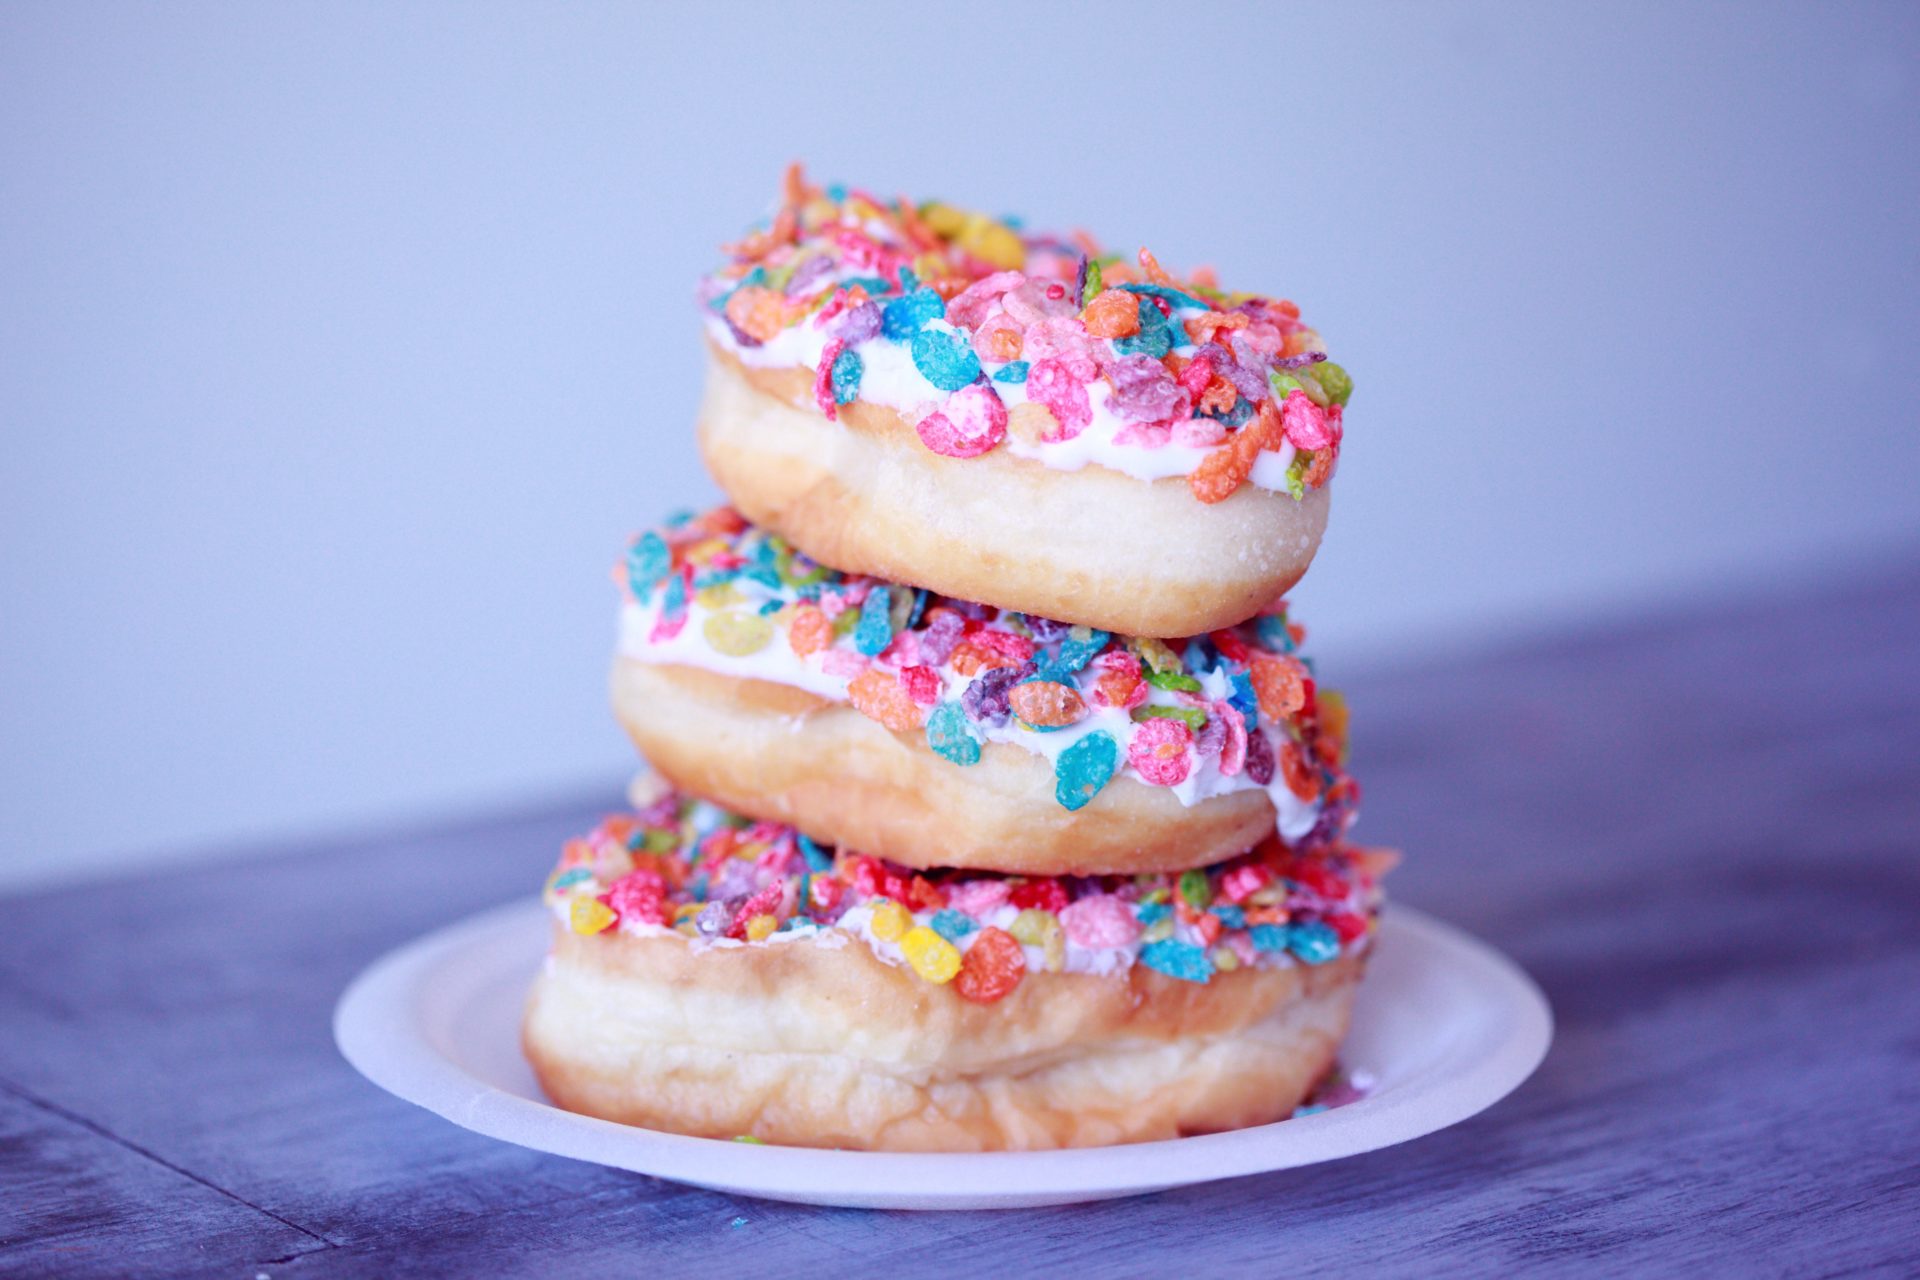 Donuts are something to avoid on a sugar detox plan.